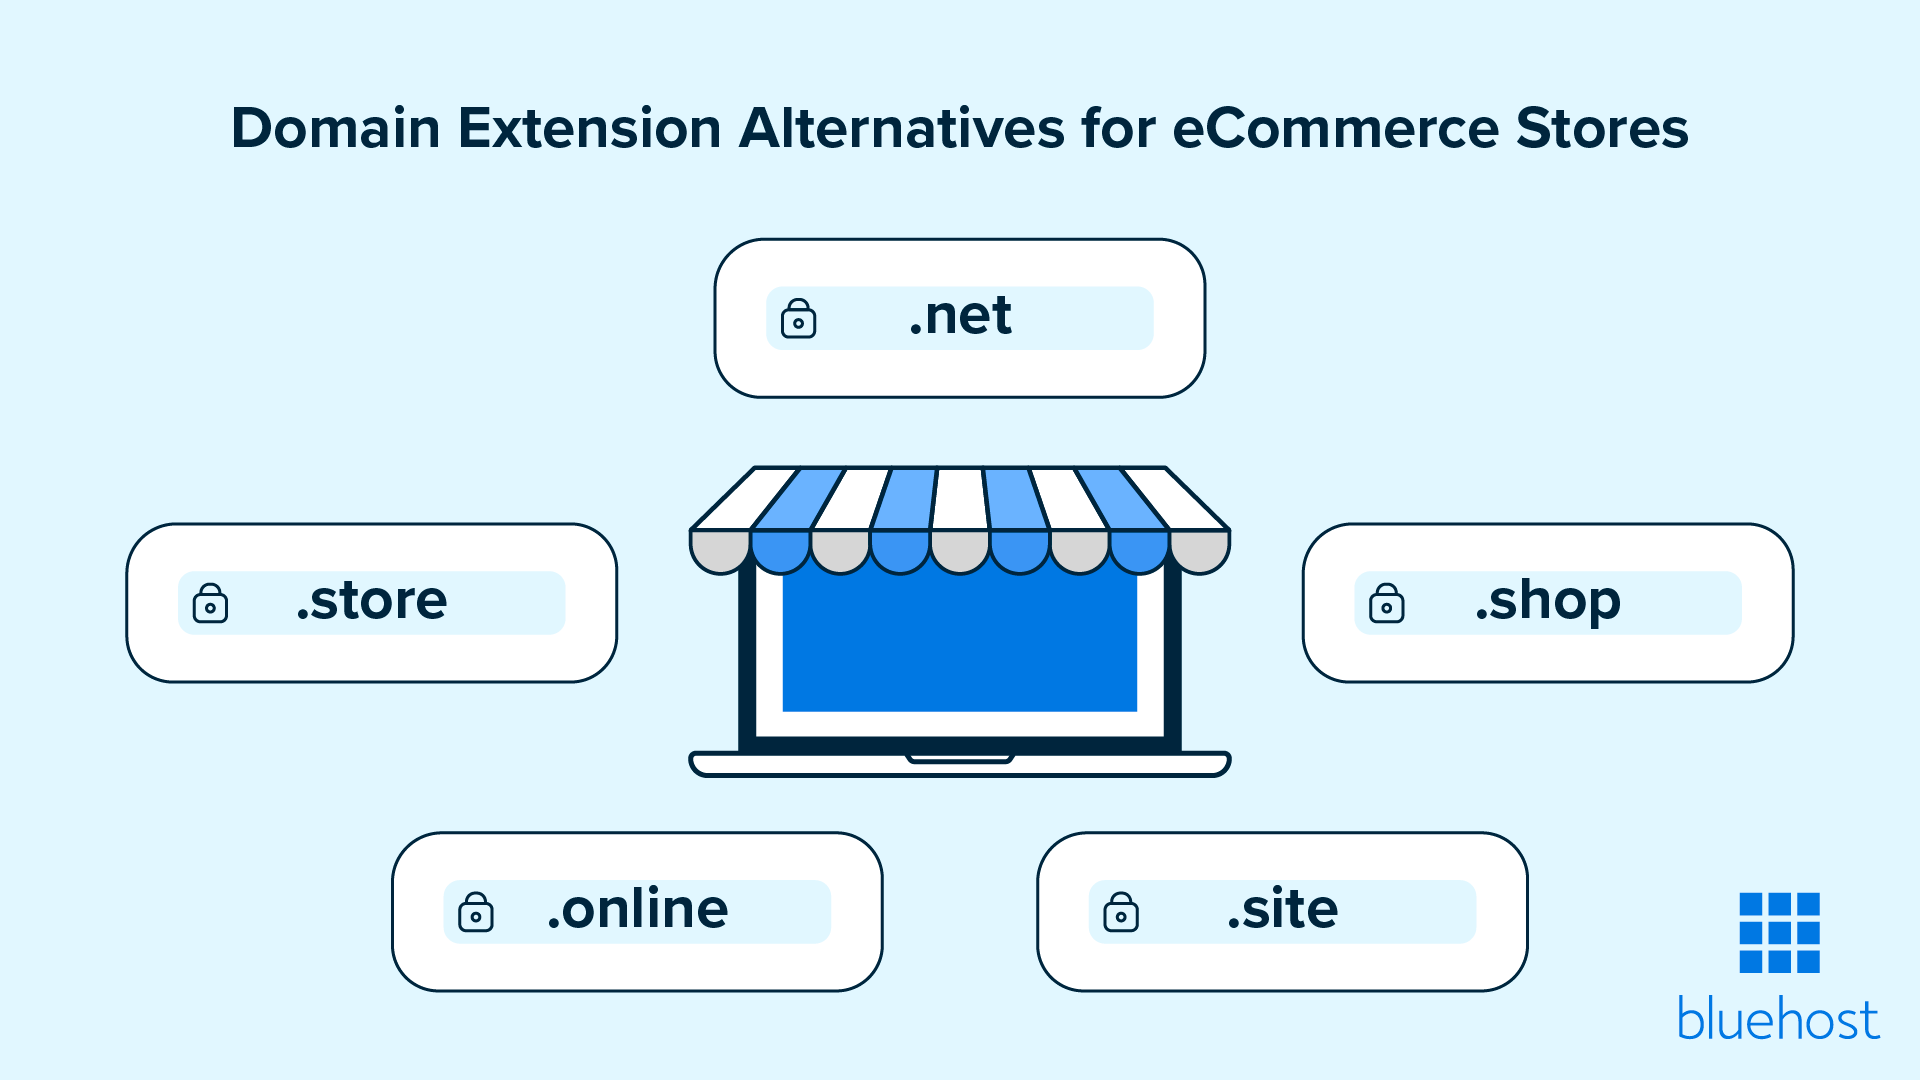 Domain extension alternatives for eCommerce stores.